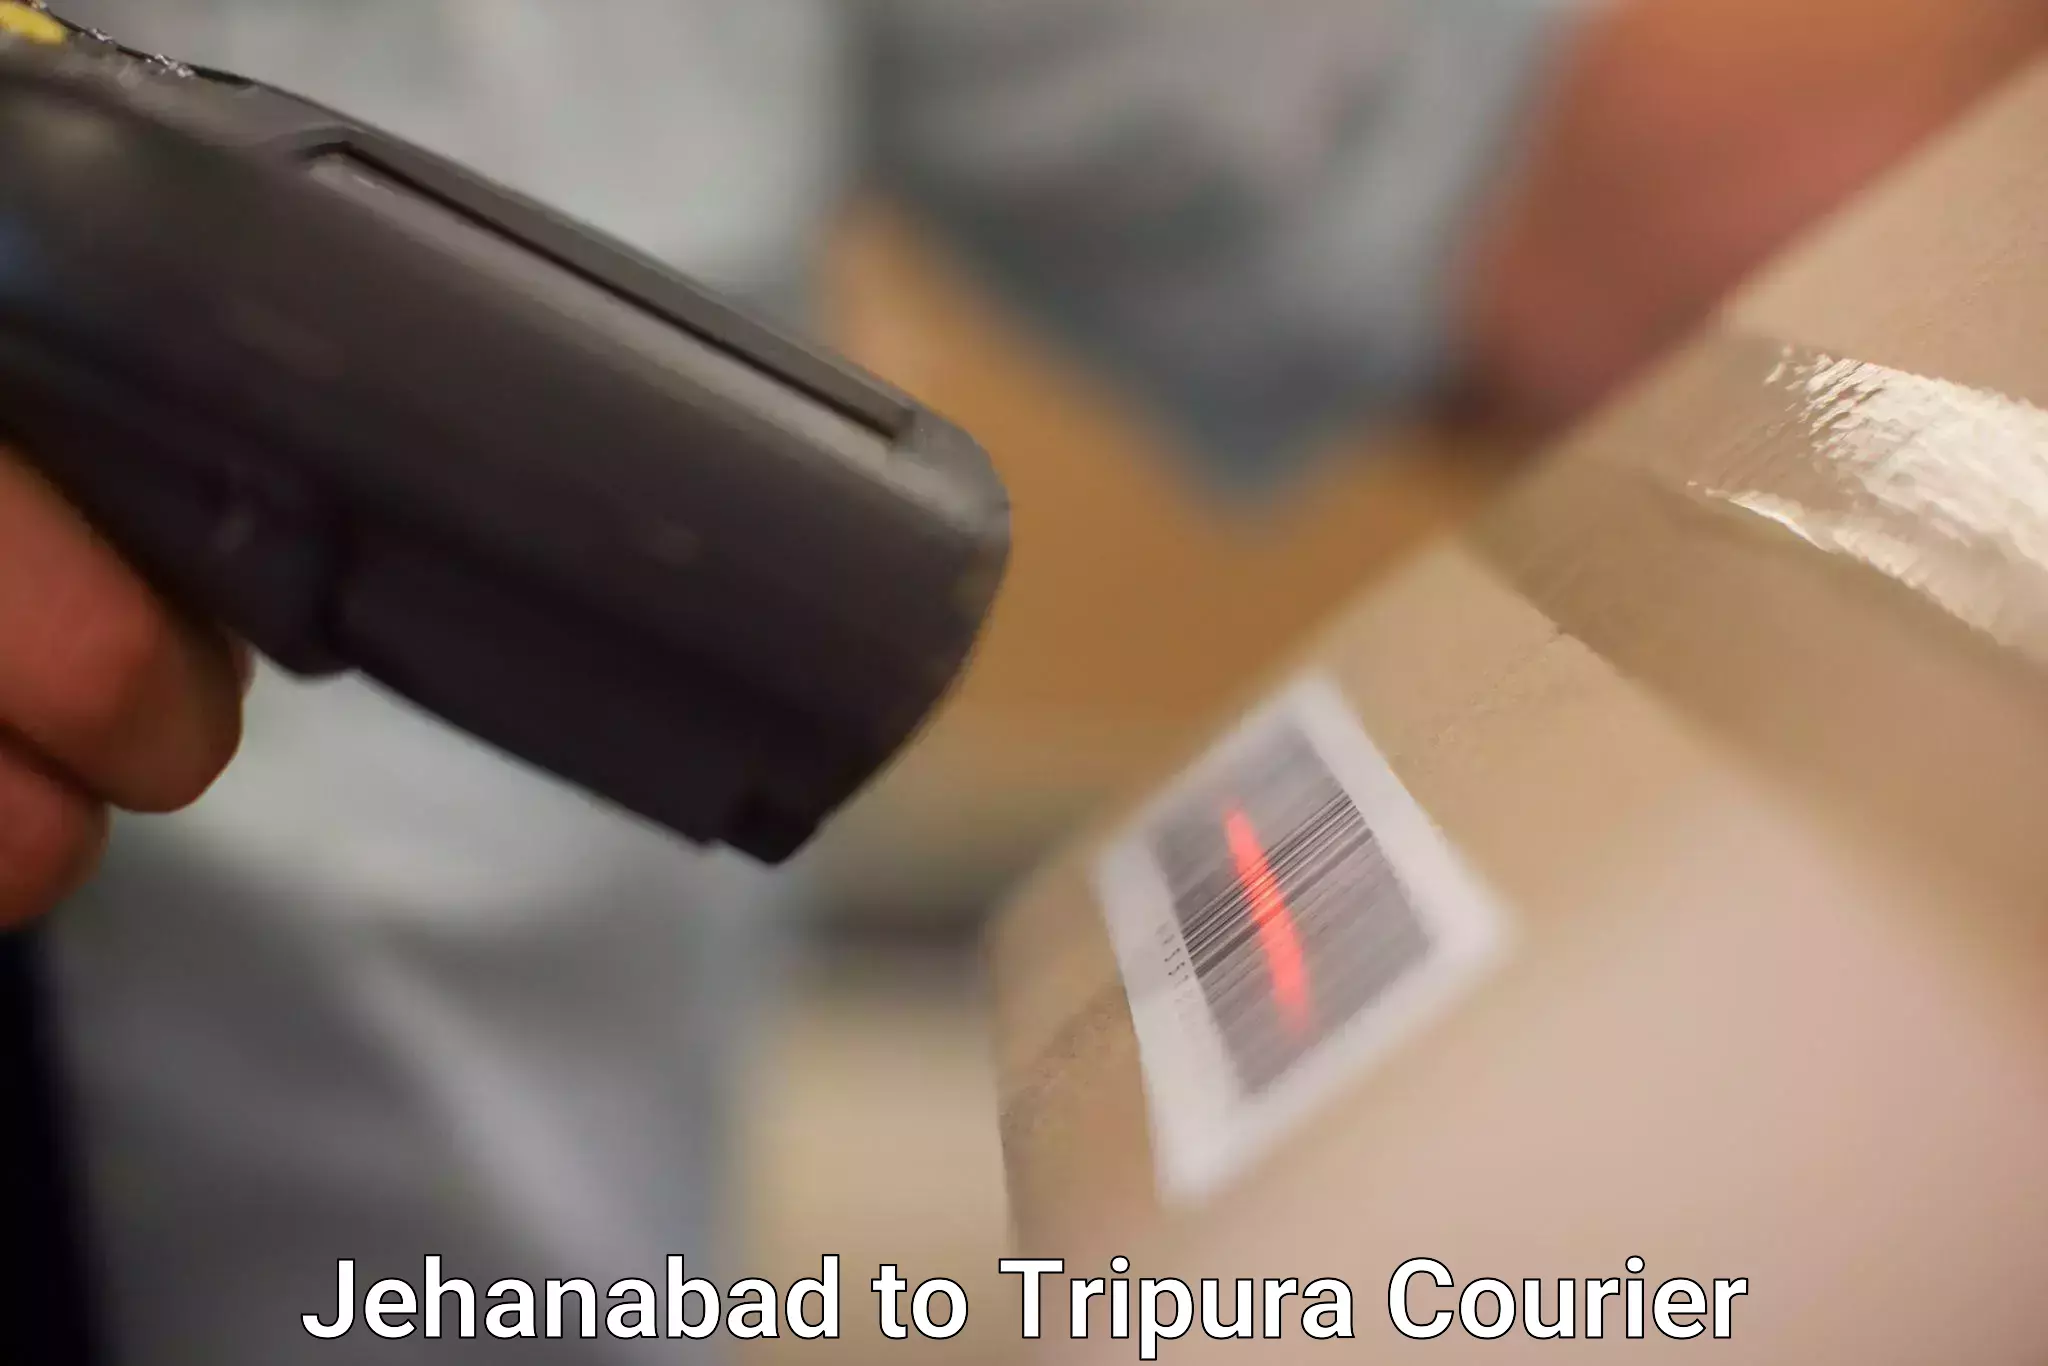 Easy access courier services Jehanabad to Udaipur Tripura